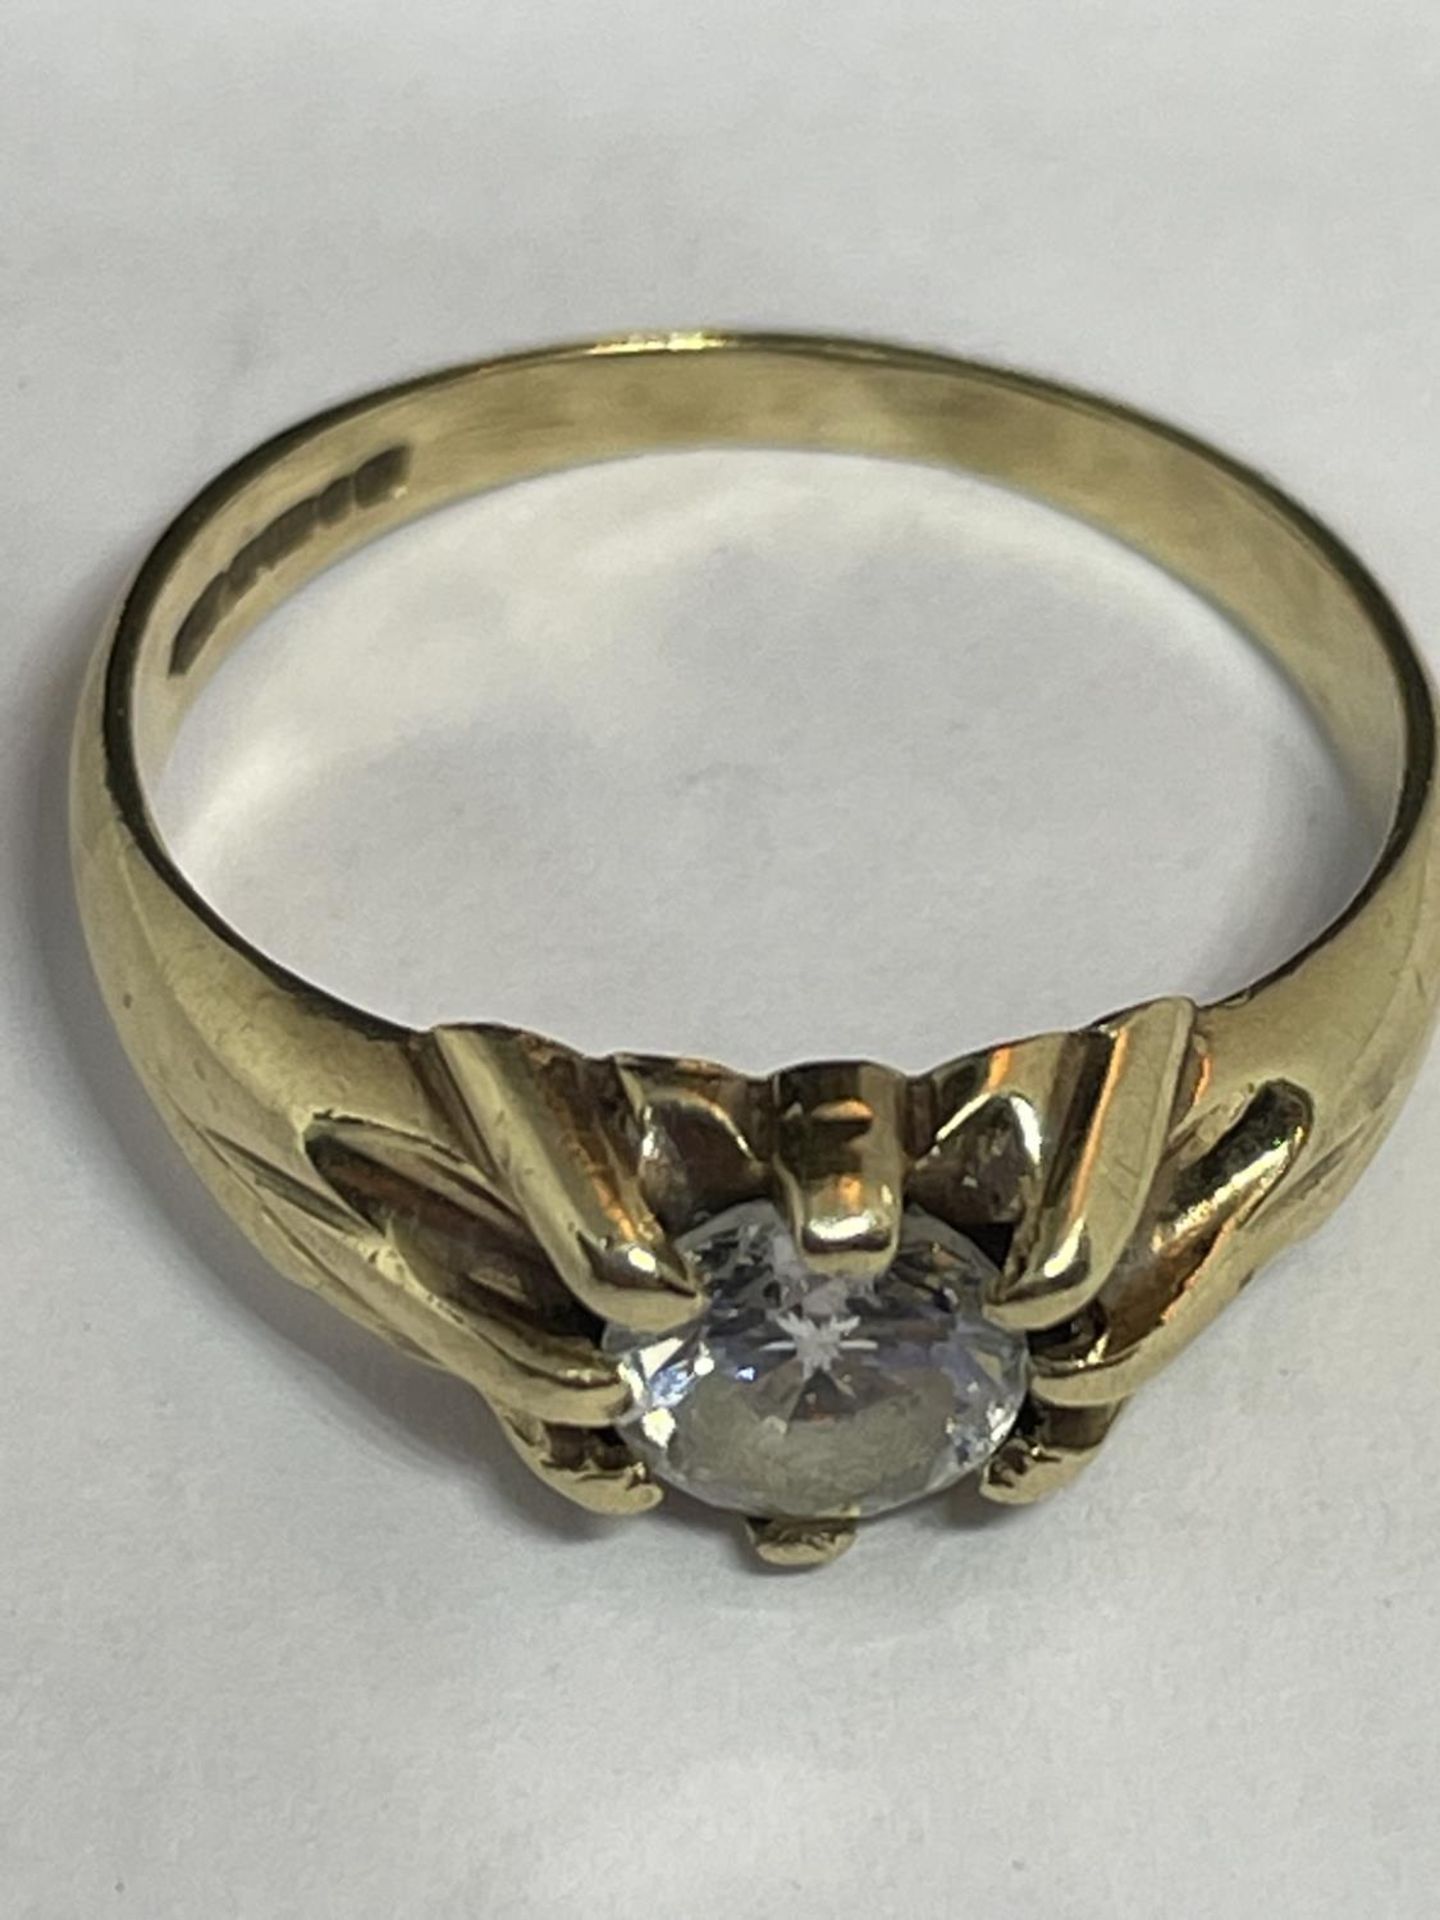 A 9 CARAT GOLD RING WITH A SOLITAIRE CUBIC ZIRCONIA STONE SIZE K - Image 2 of 8